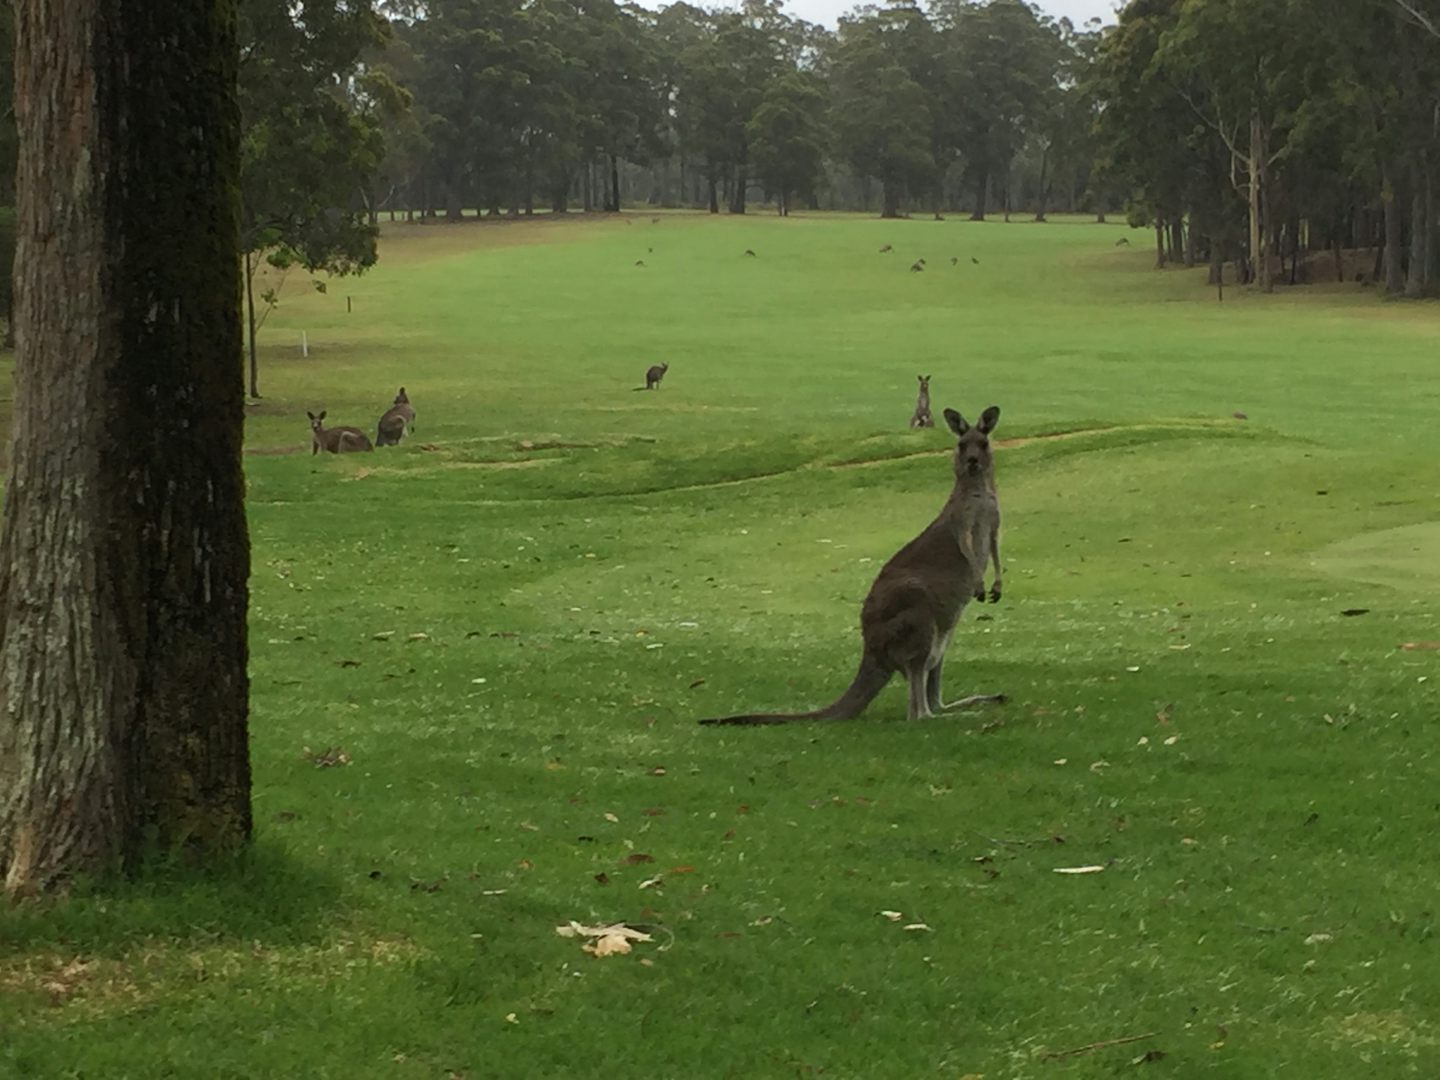 Tea and kangaroo siting. Excellent adventure!